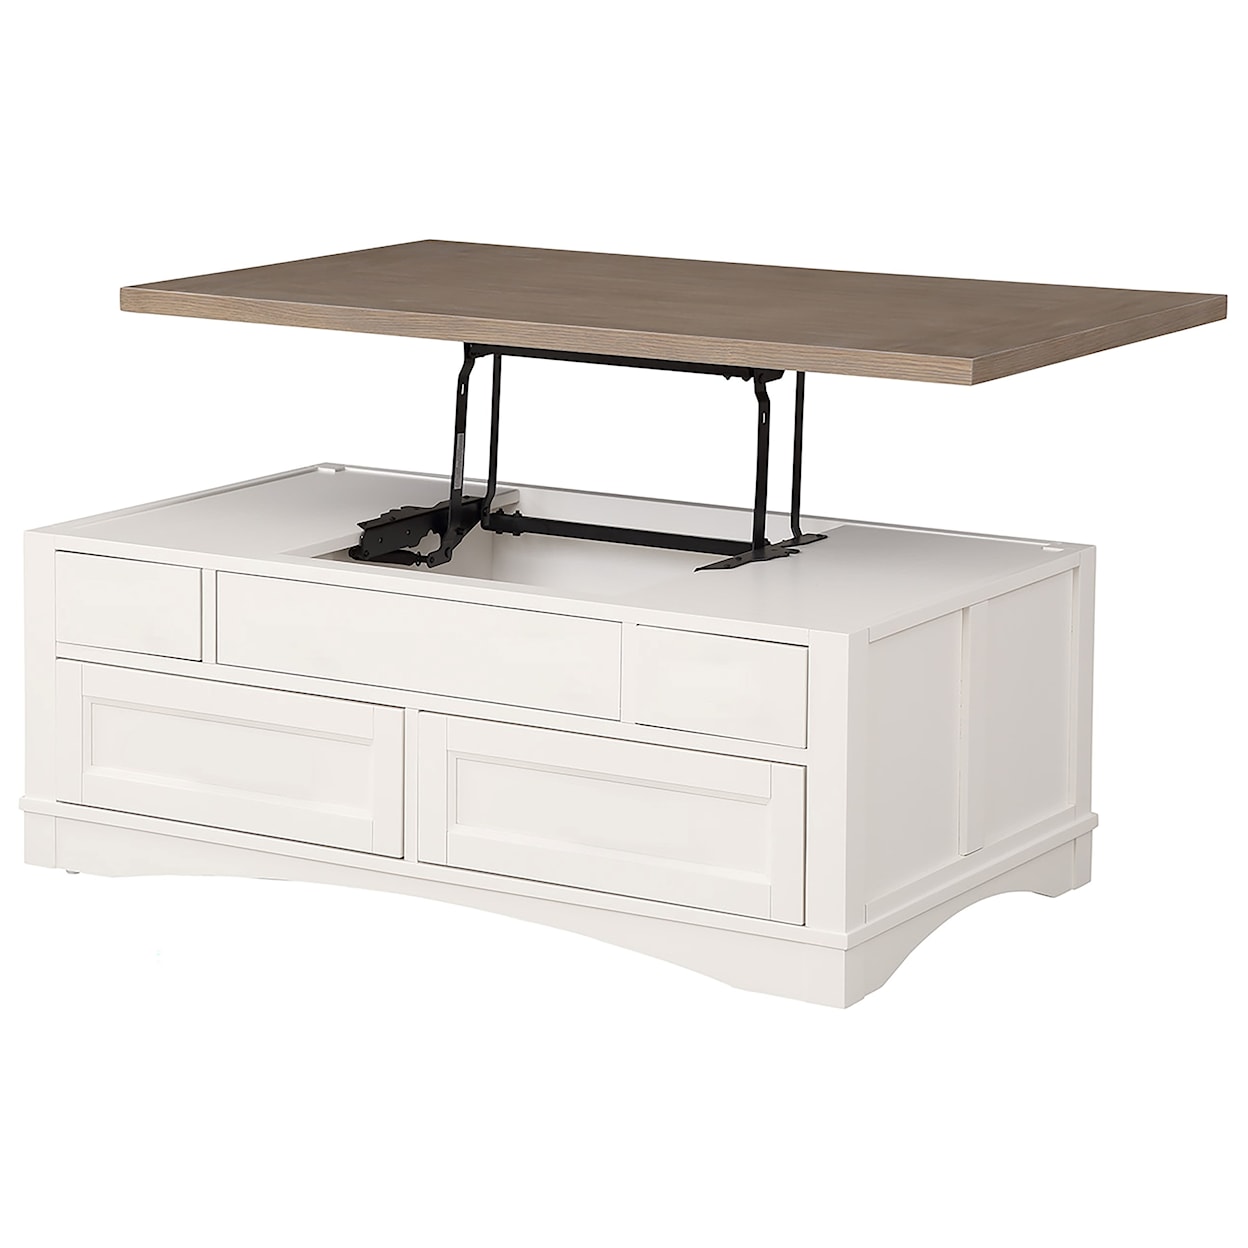 Parker House Americana Modern Cocktail Table with Lift Top